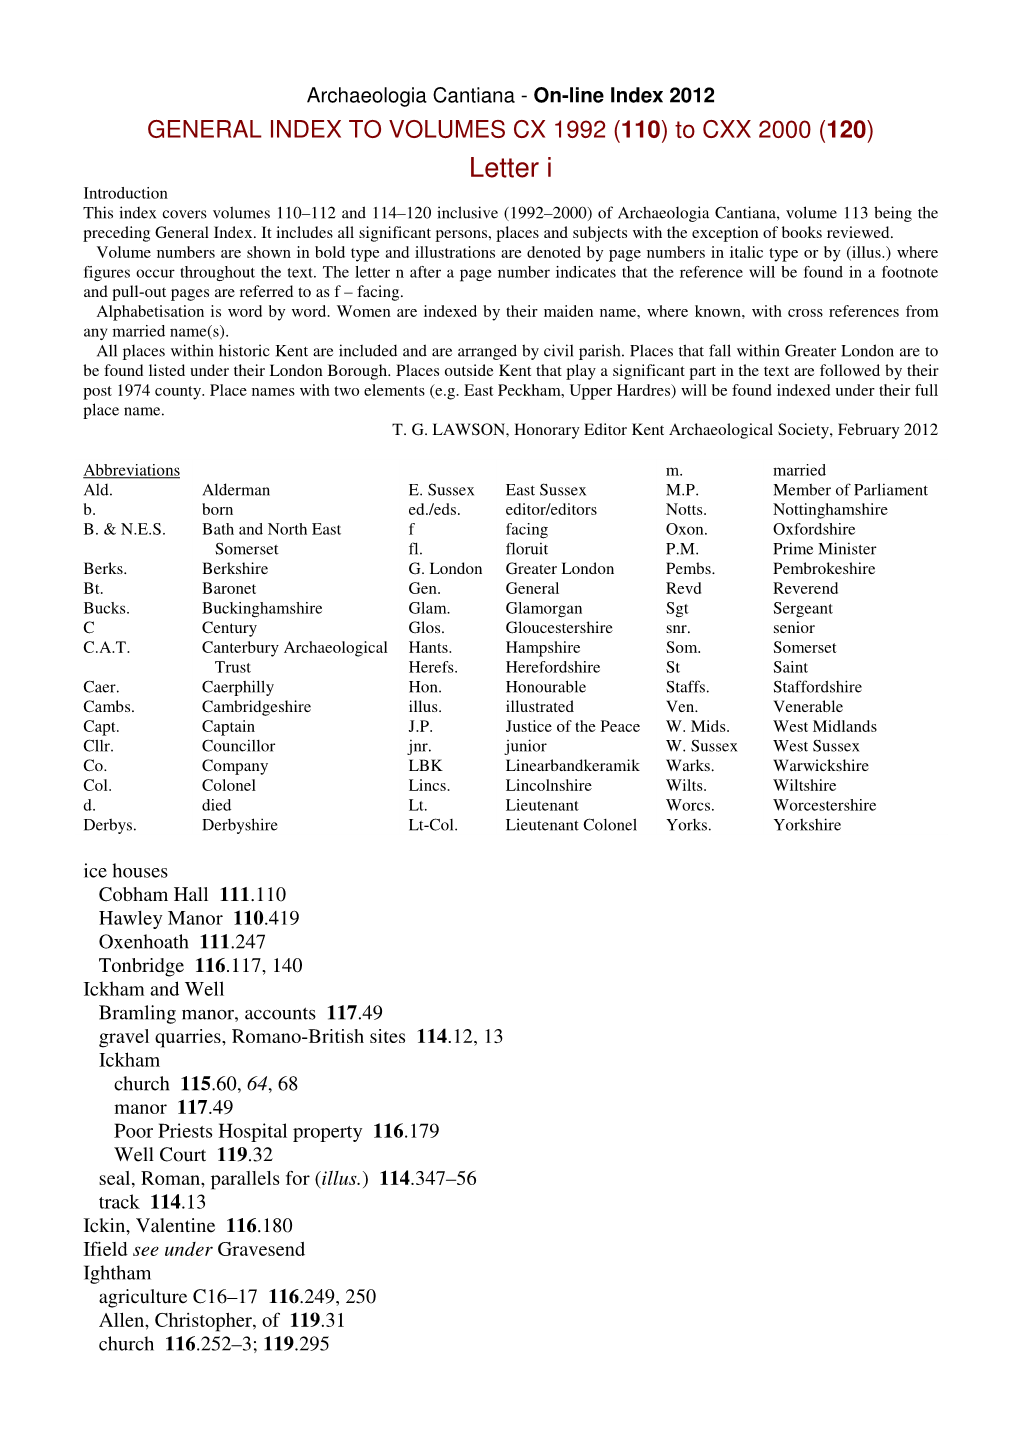 Letter I Introduction This Index Covers Volumes 110–112 and 114–120 Inclusive (1992–2000) of Archaeologia Cantiana, Volume 113 Being the Preceding General Index